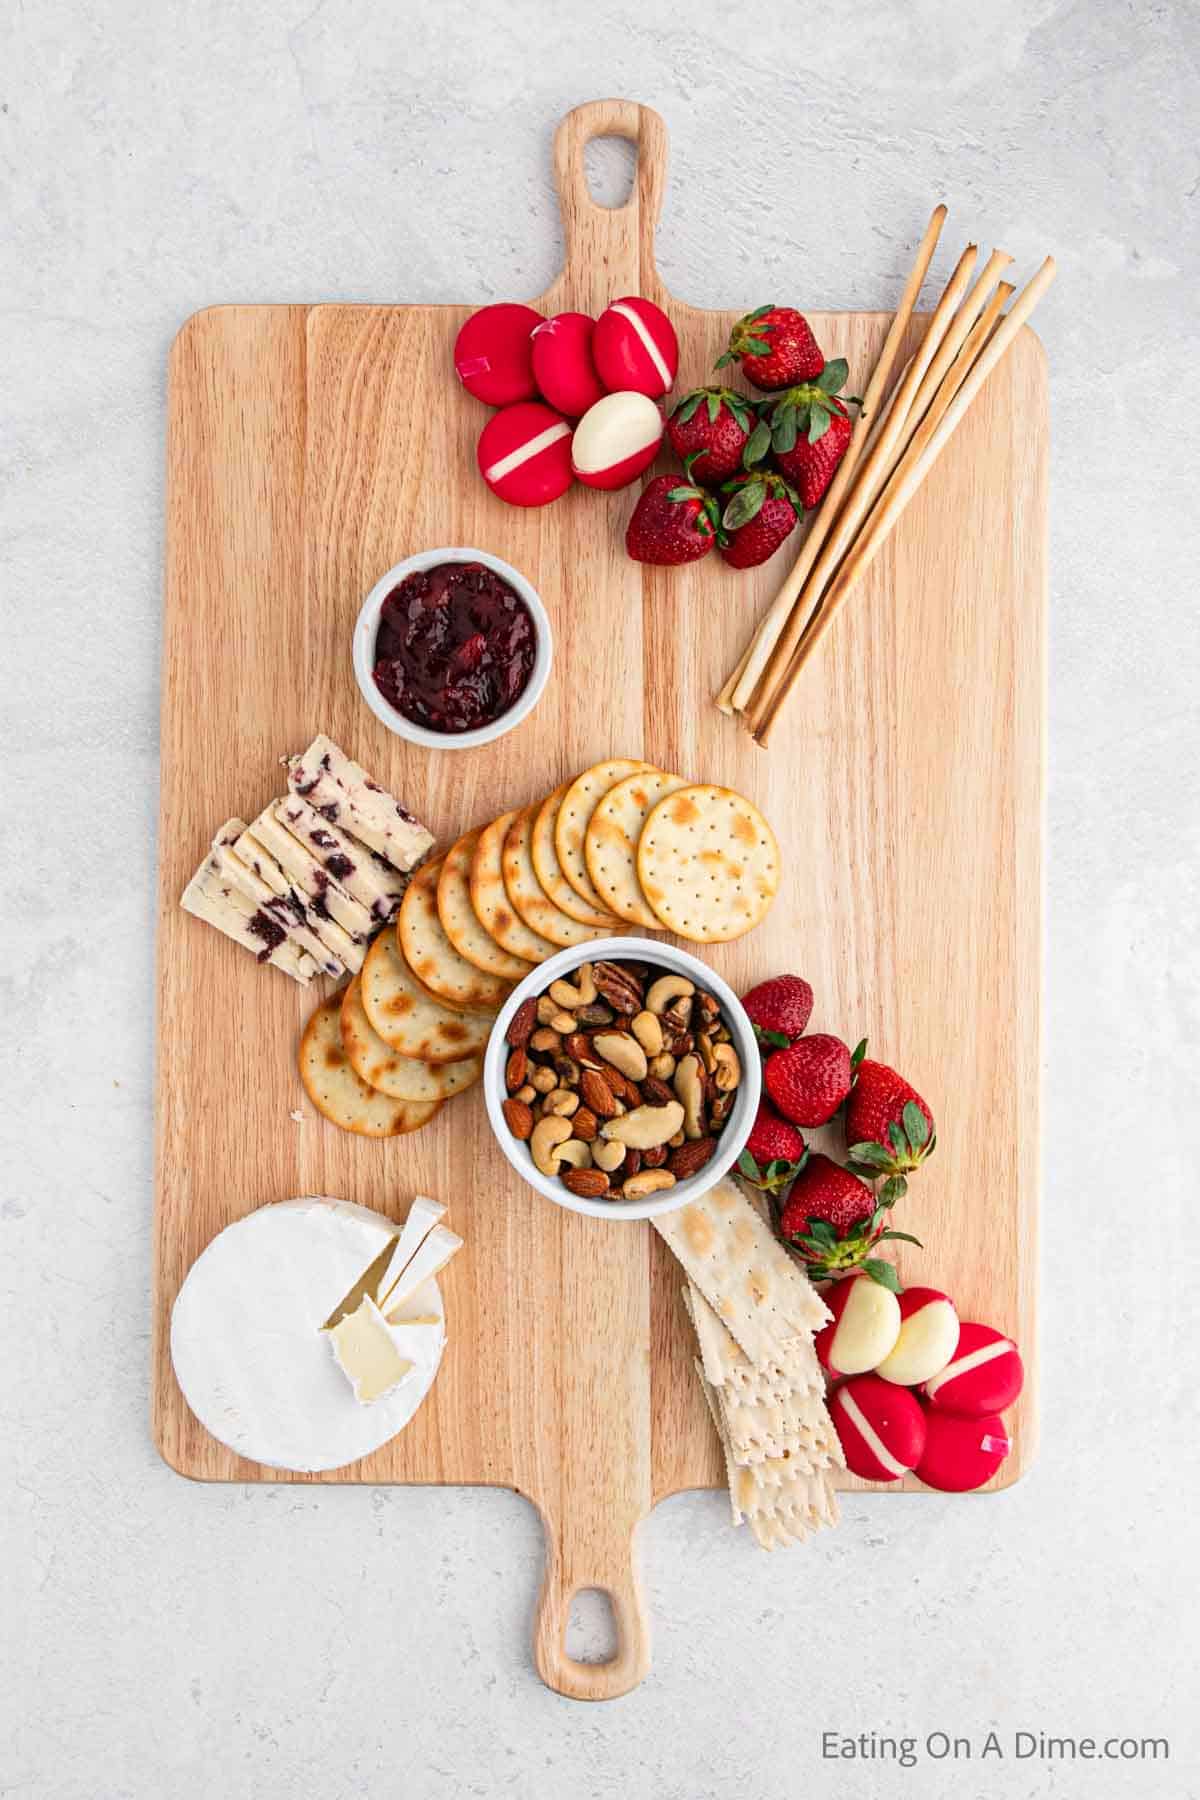 Placing cheese, crackers, fruit and nuts on the board